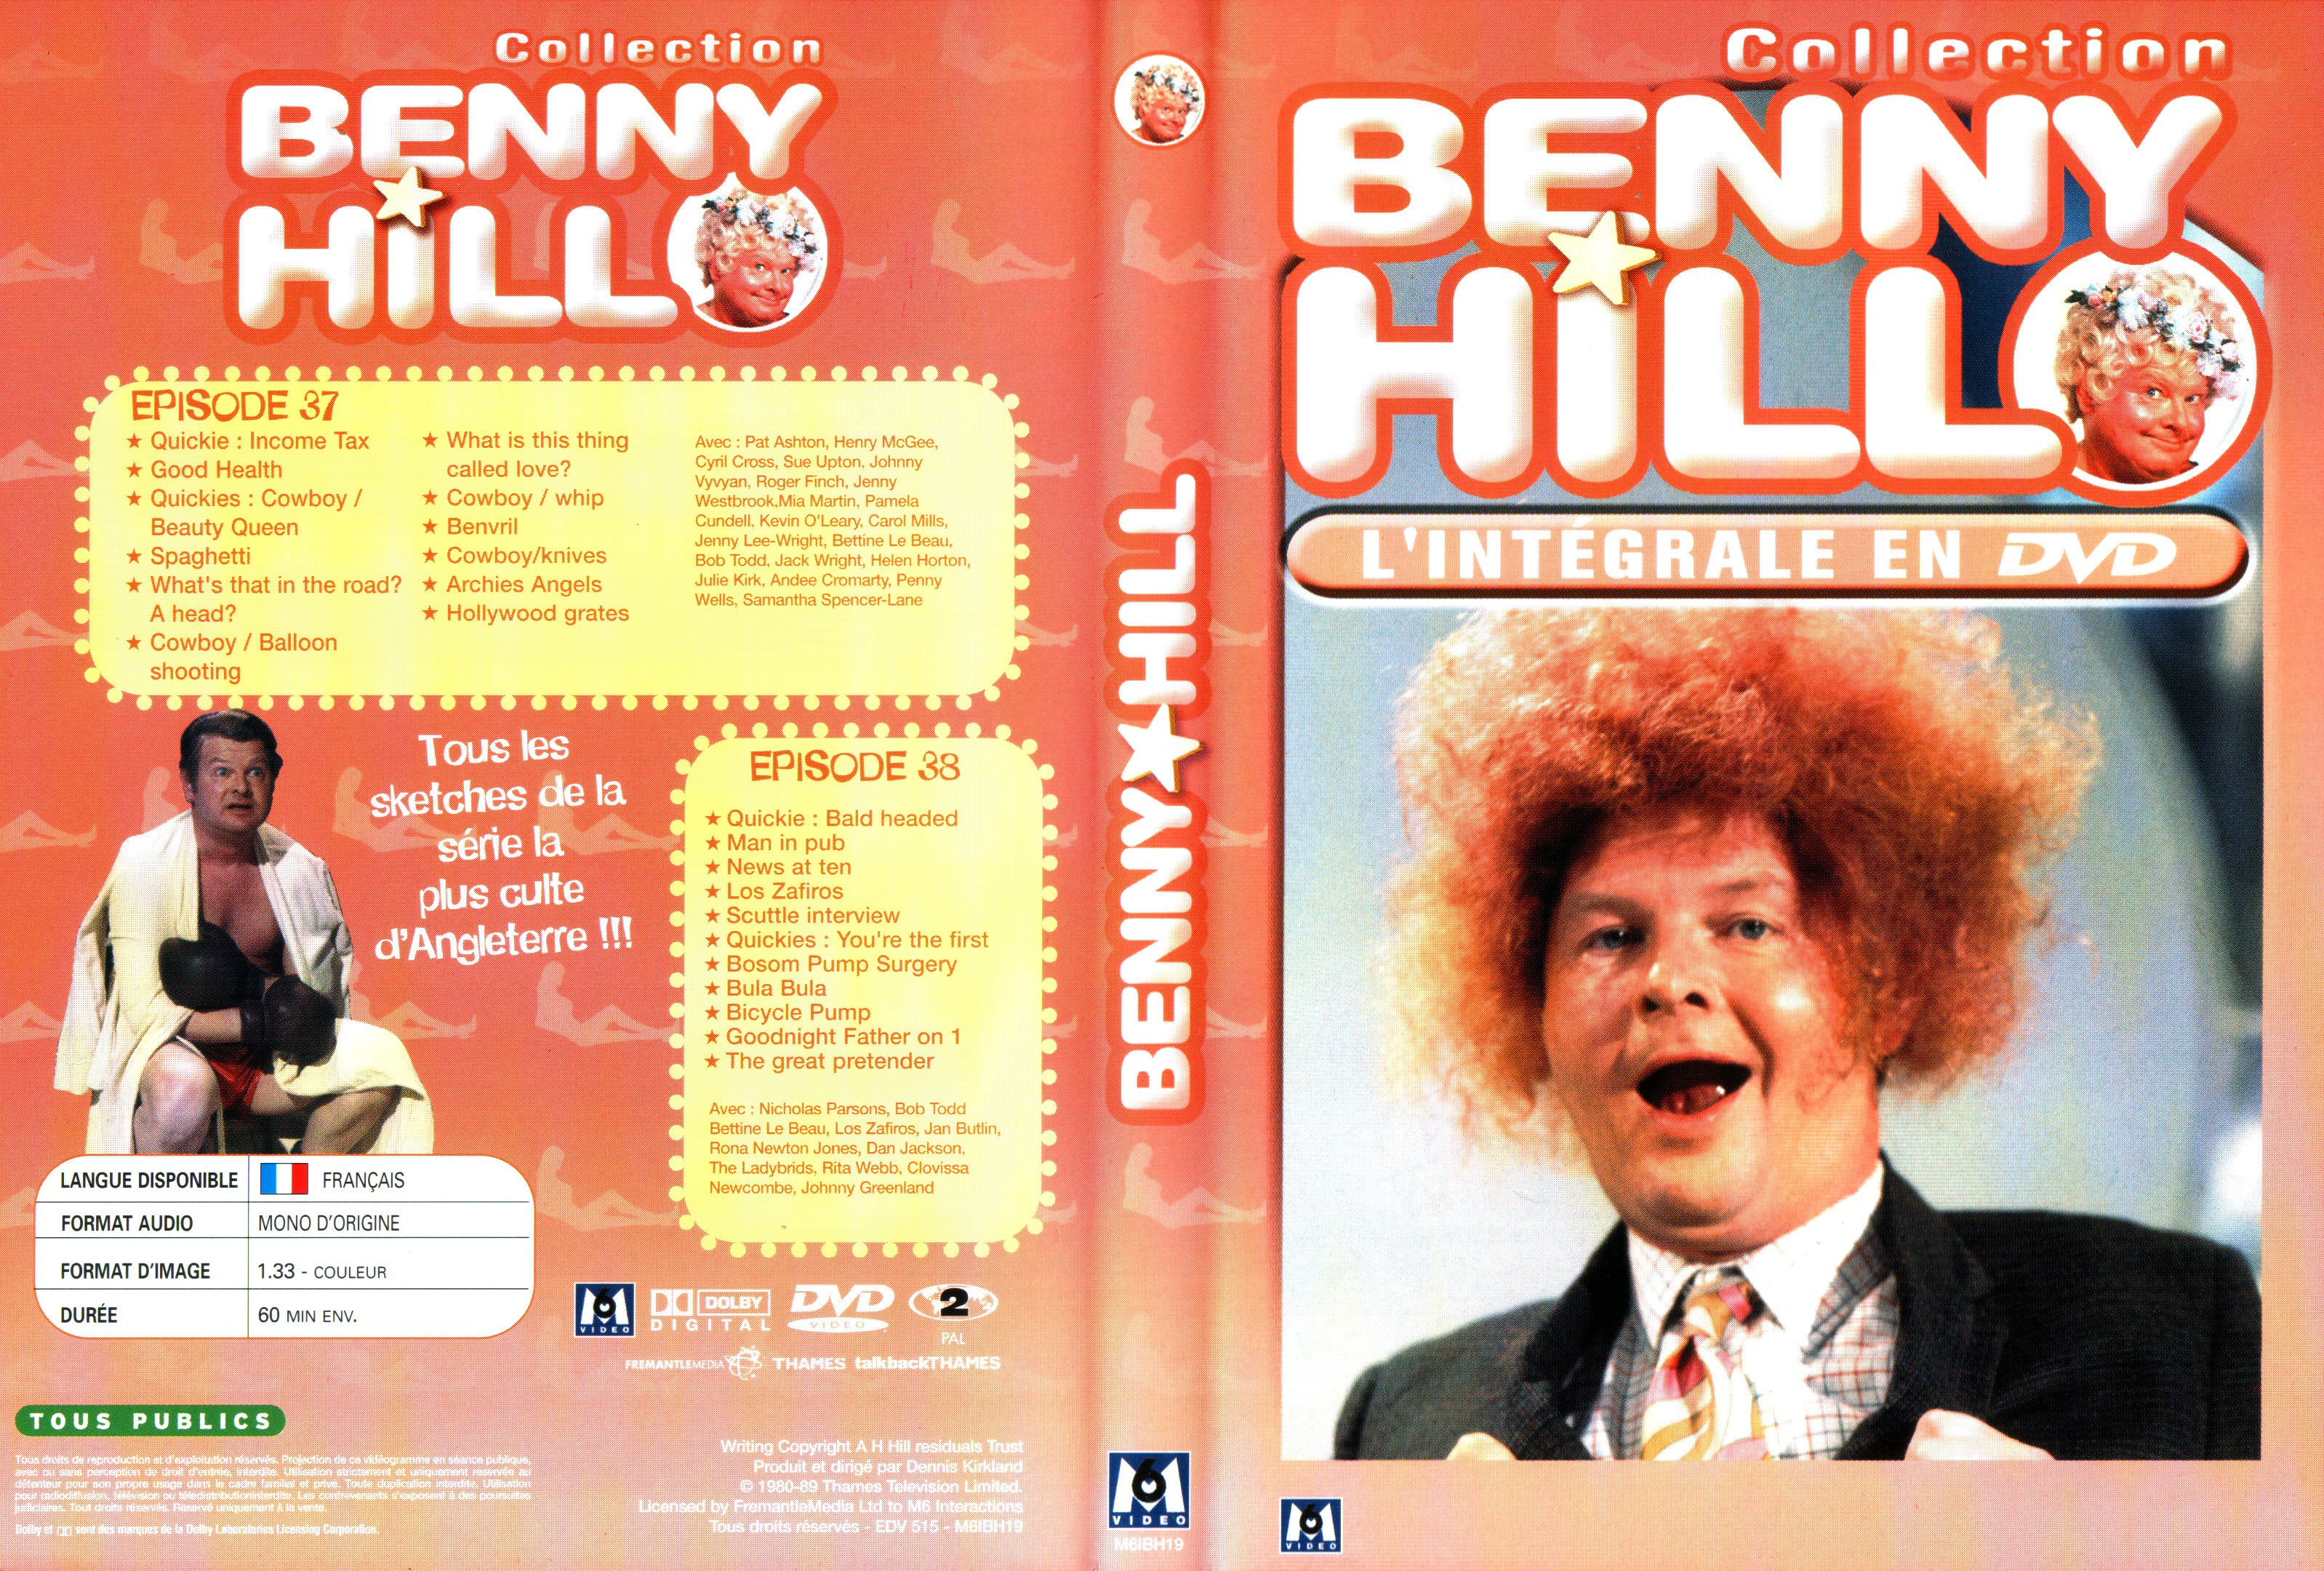 Jaquette DVD Benny Hill collection Episodes 37-38